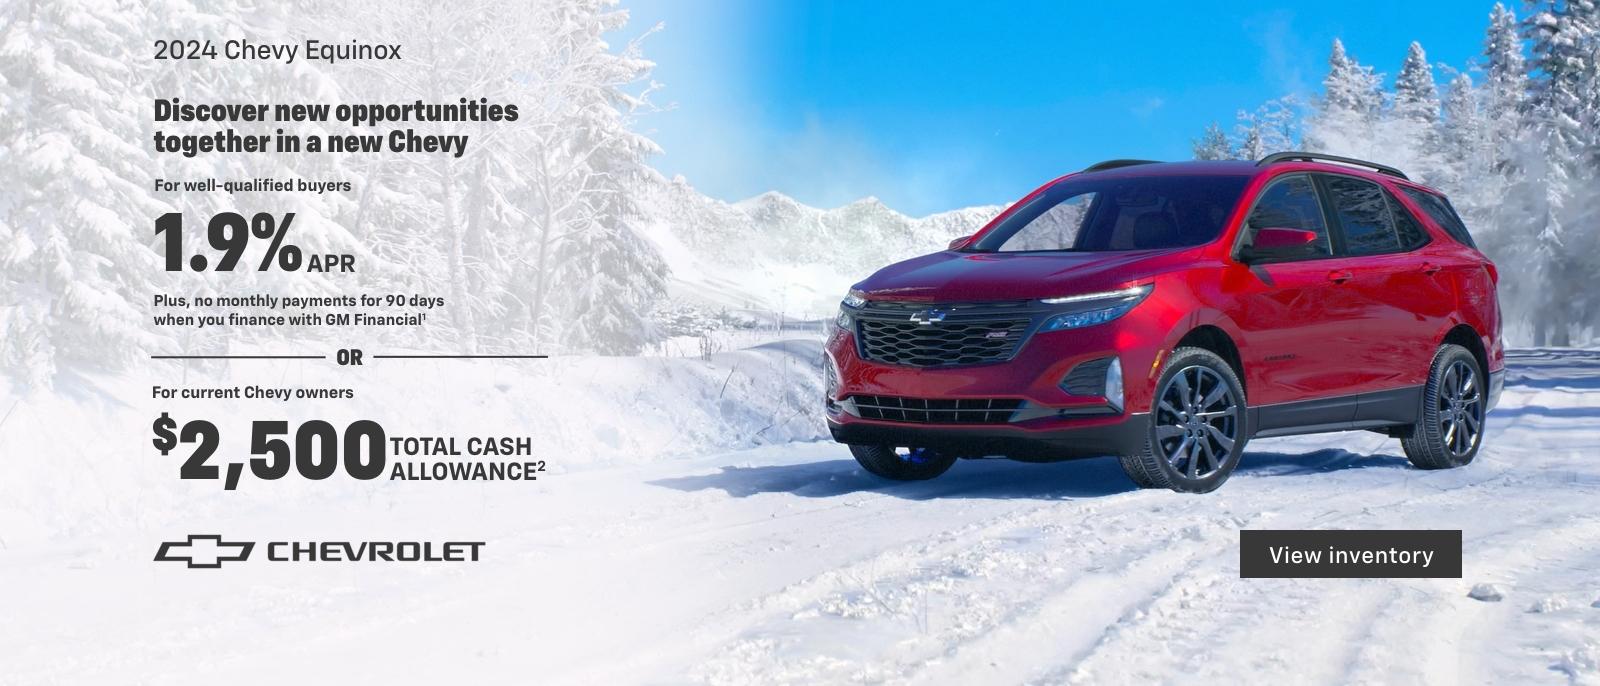 2024 Chevy Equinox. For well-qualified buyers 1.9% APR + no monthly payments for 90 days when you finance with GM Financial. Or, For current Chevy owners $2,500 total cash allowance.